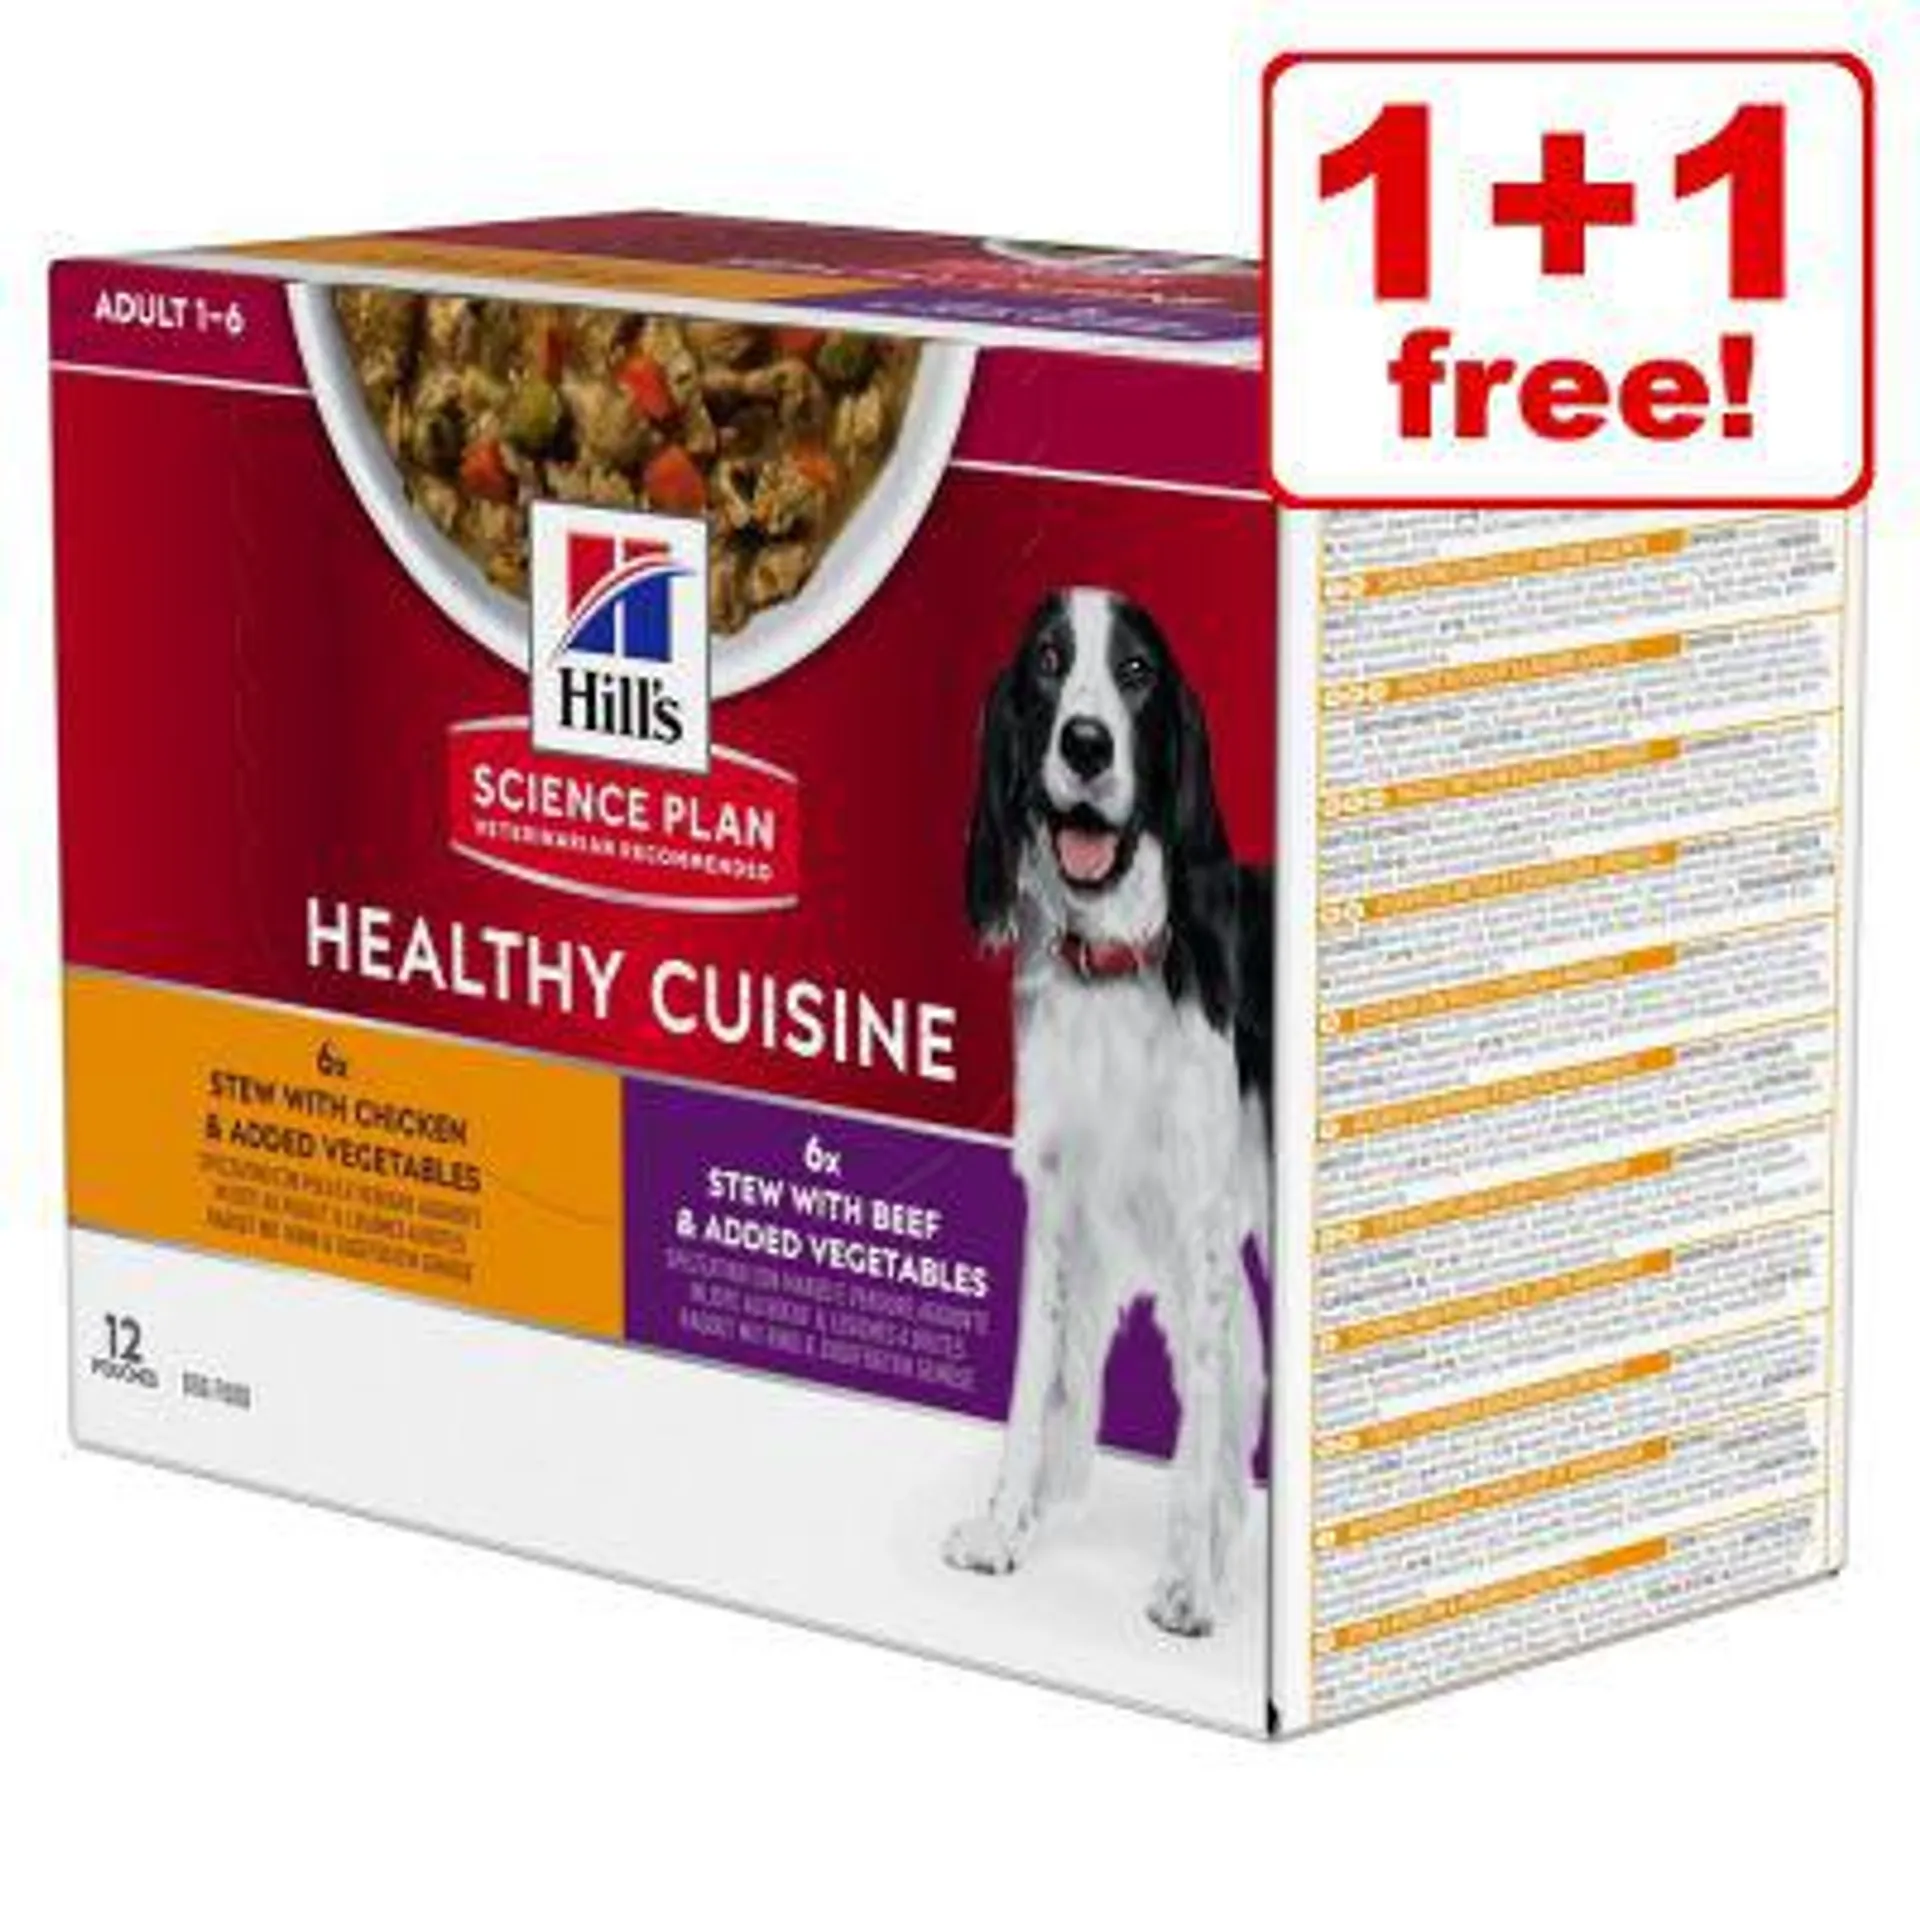 12 x 90g Hill’s Science Plan Healthy Cuisine - Buy One Get One Free!*